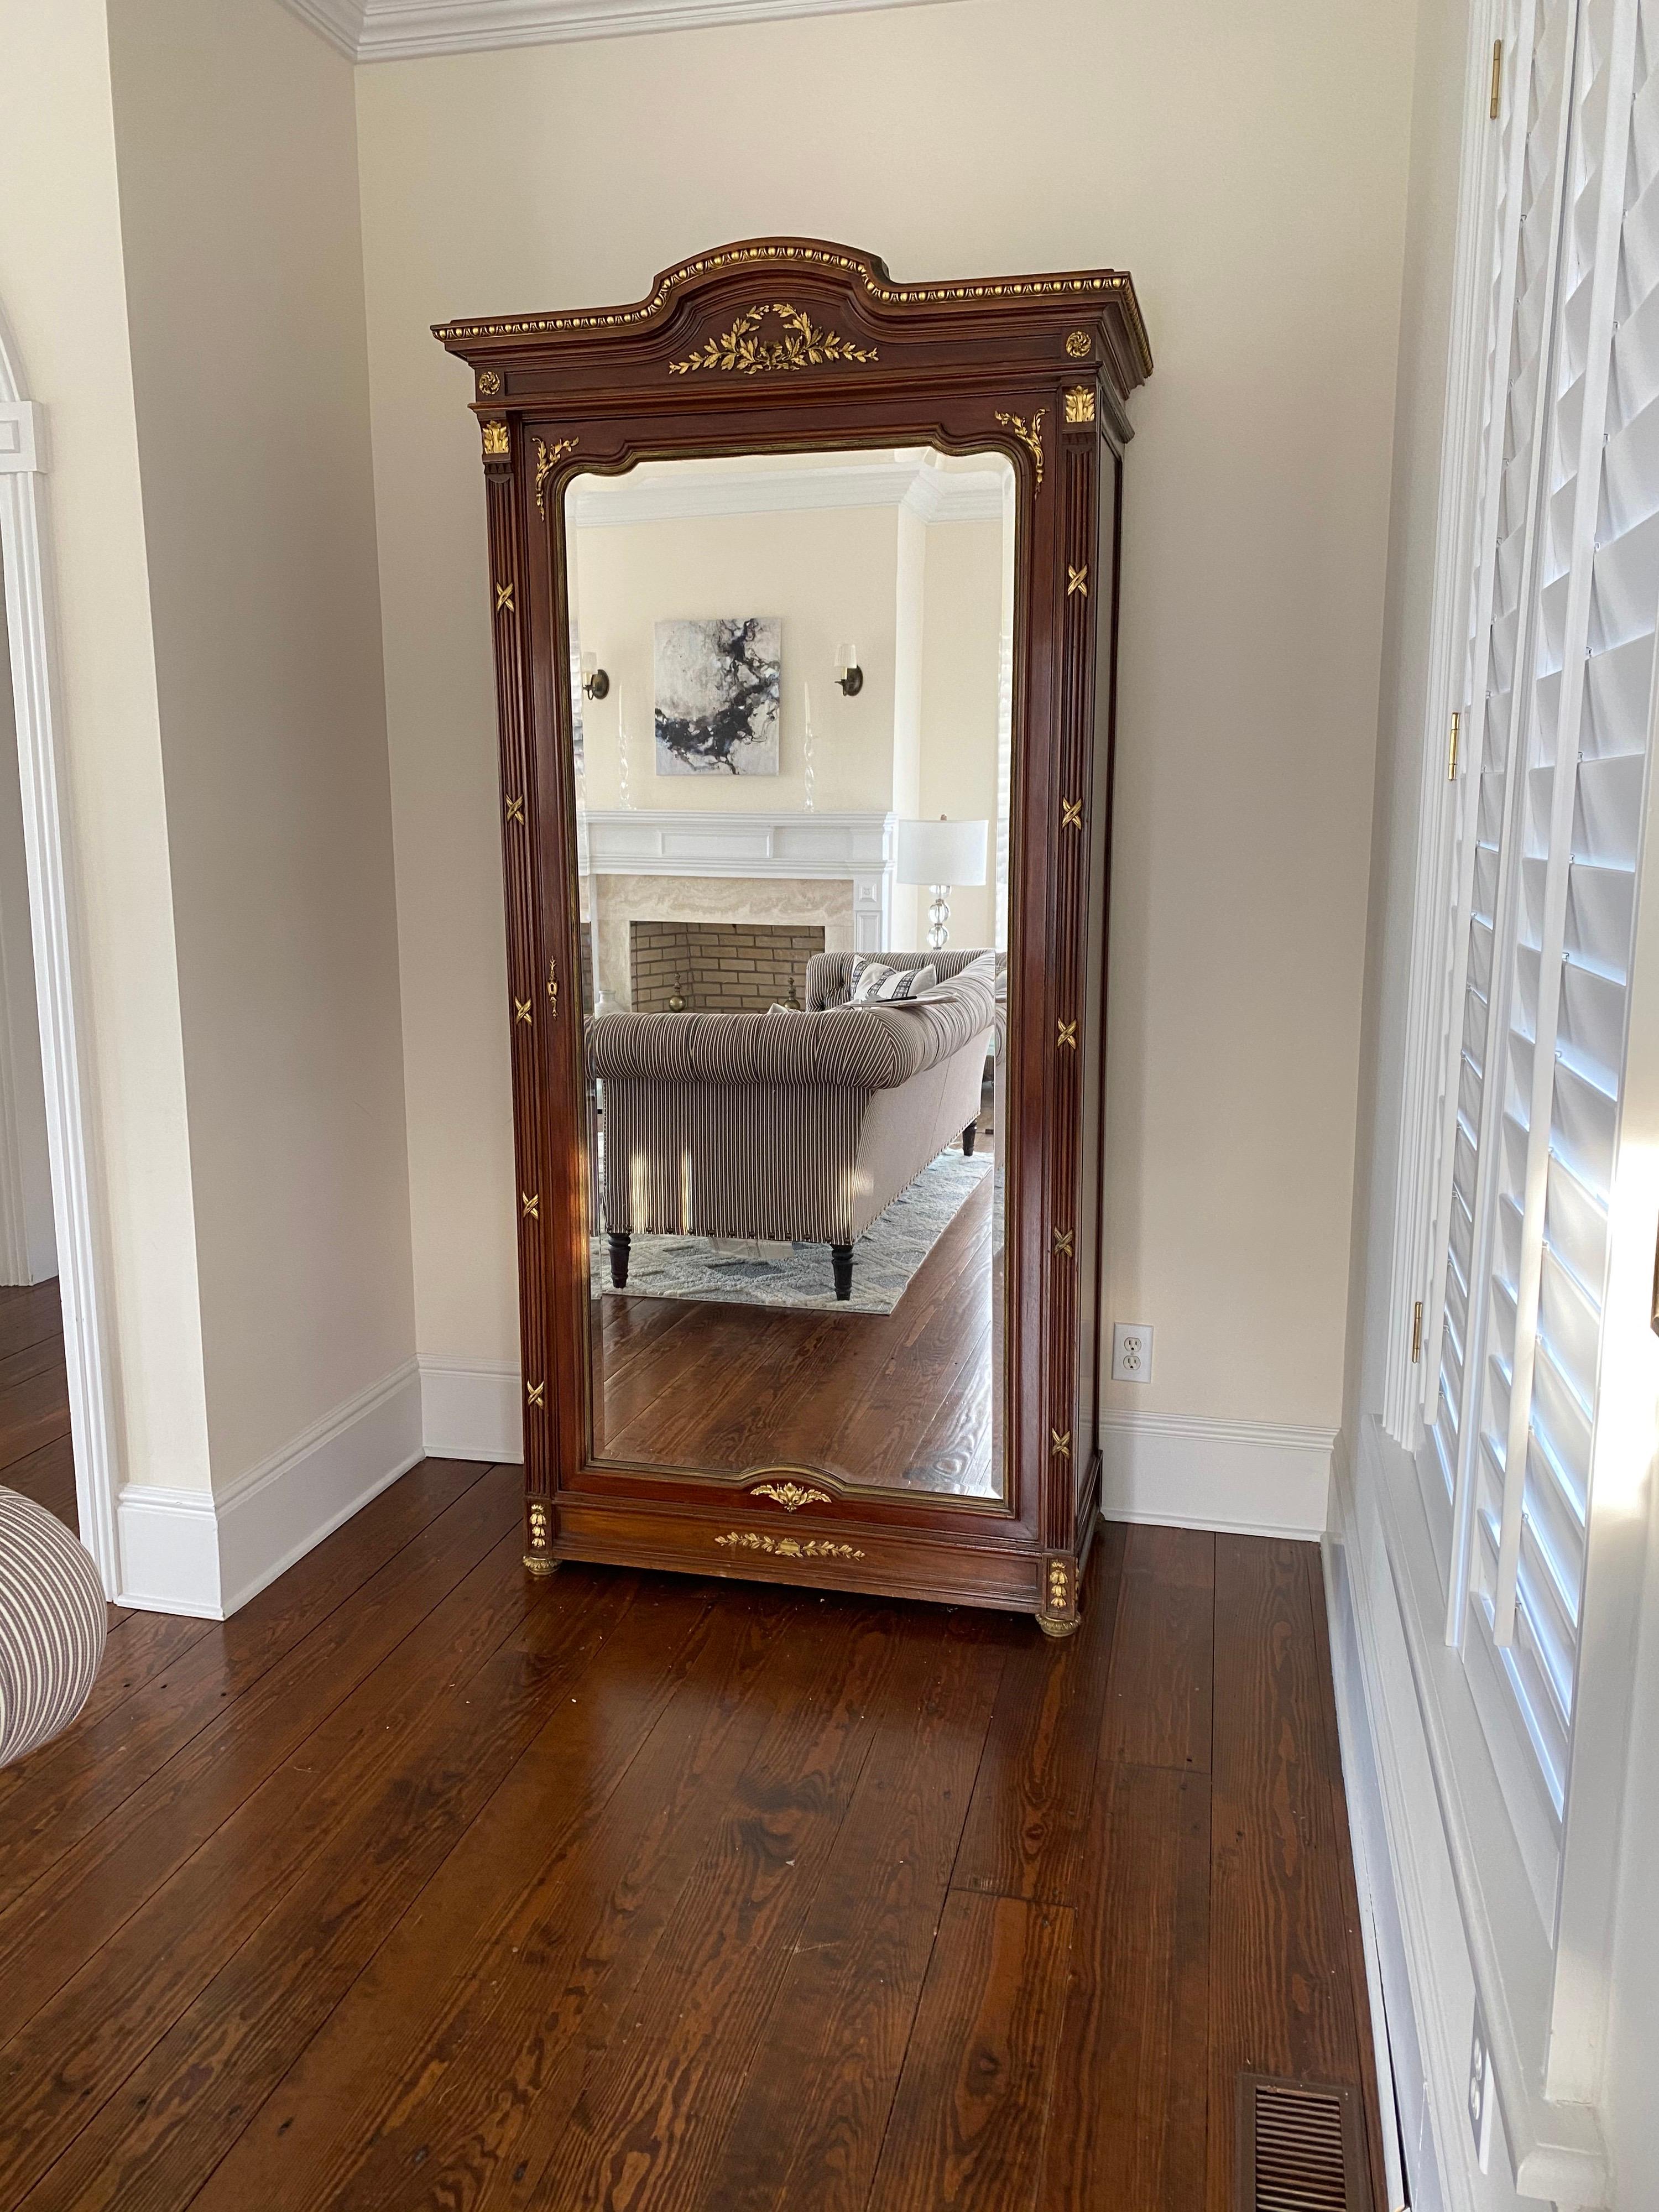 French neoclassical style tall mirrored cabinet/armoire
Beautiful reproduction, originally with legs, legs were cut off. Selling as is.
Parcel-gilt details, beveled mirror, Single door opening to three removable shelves and one bottom drawer